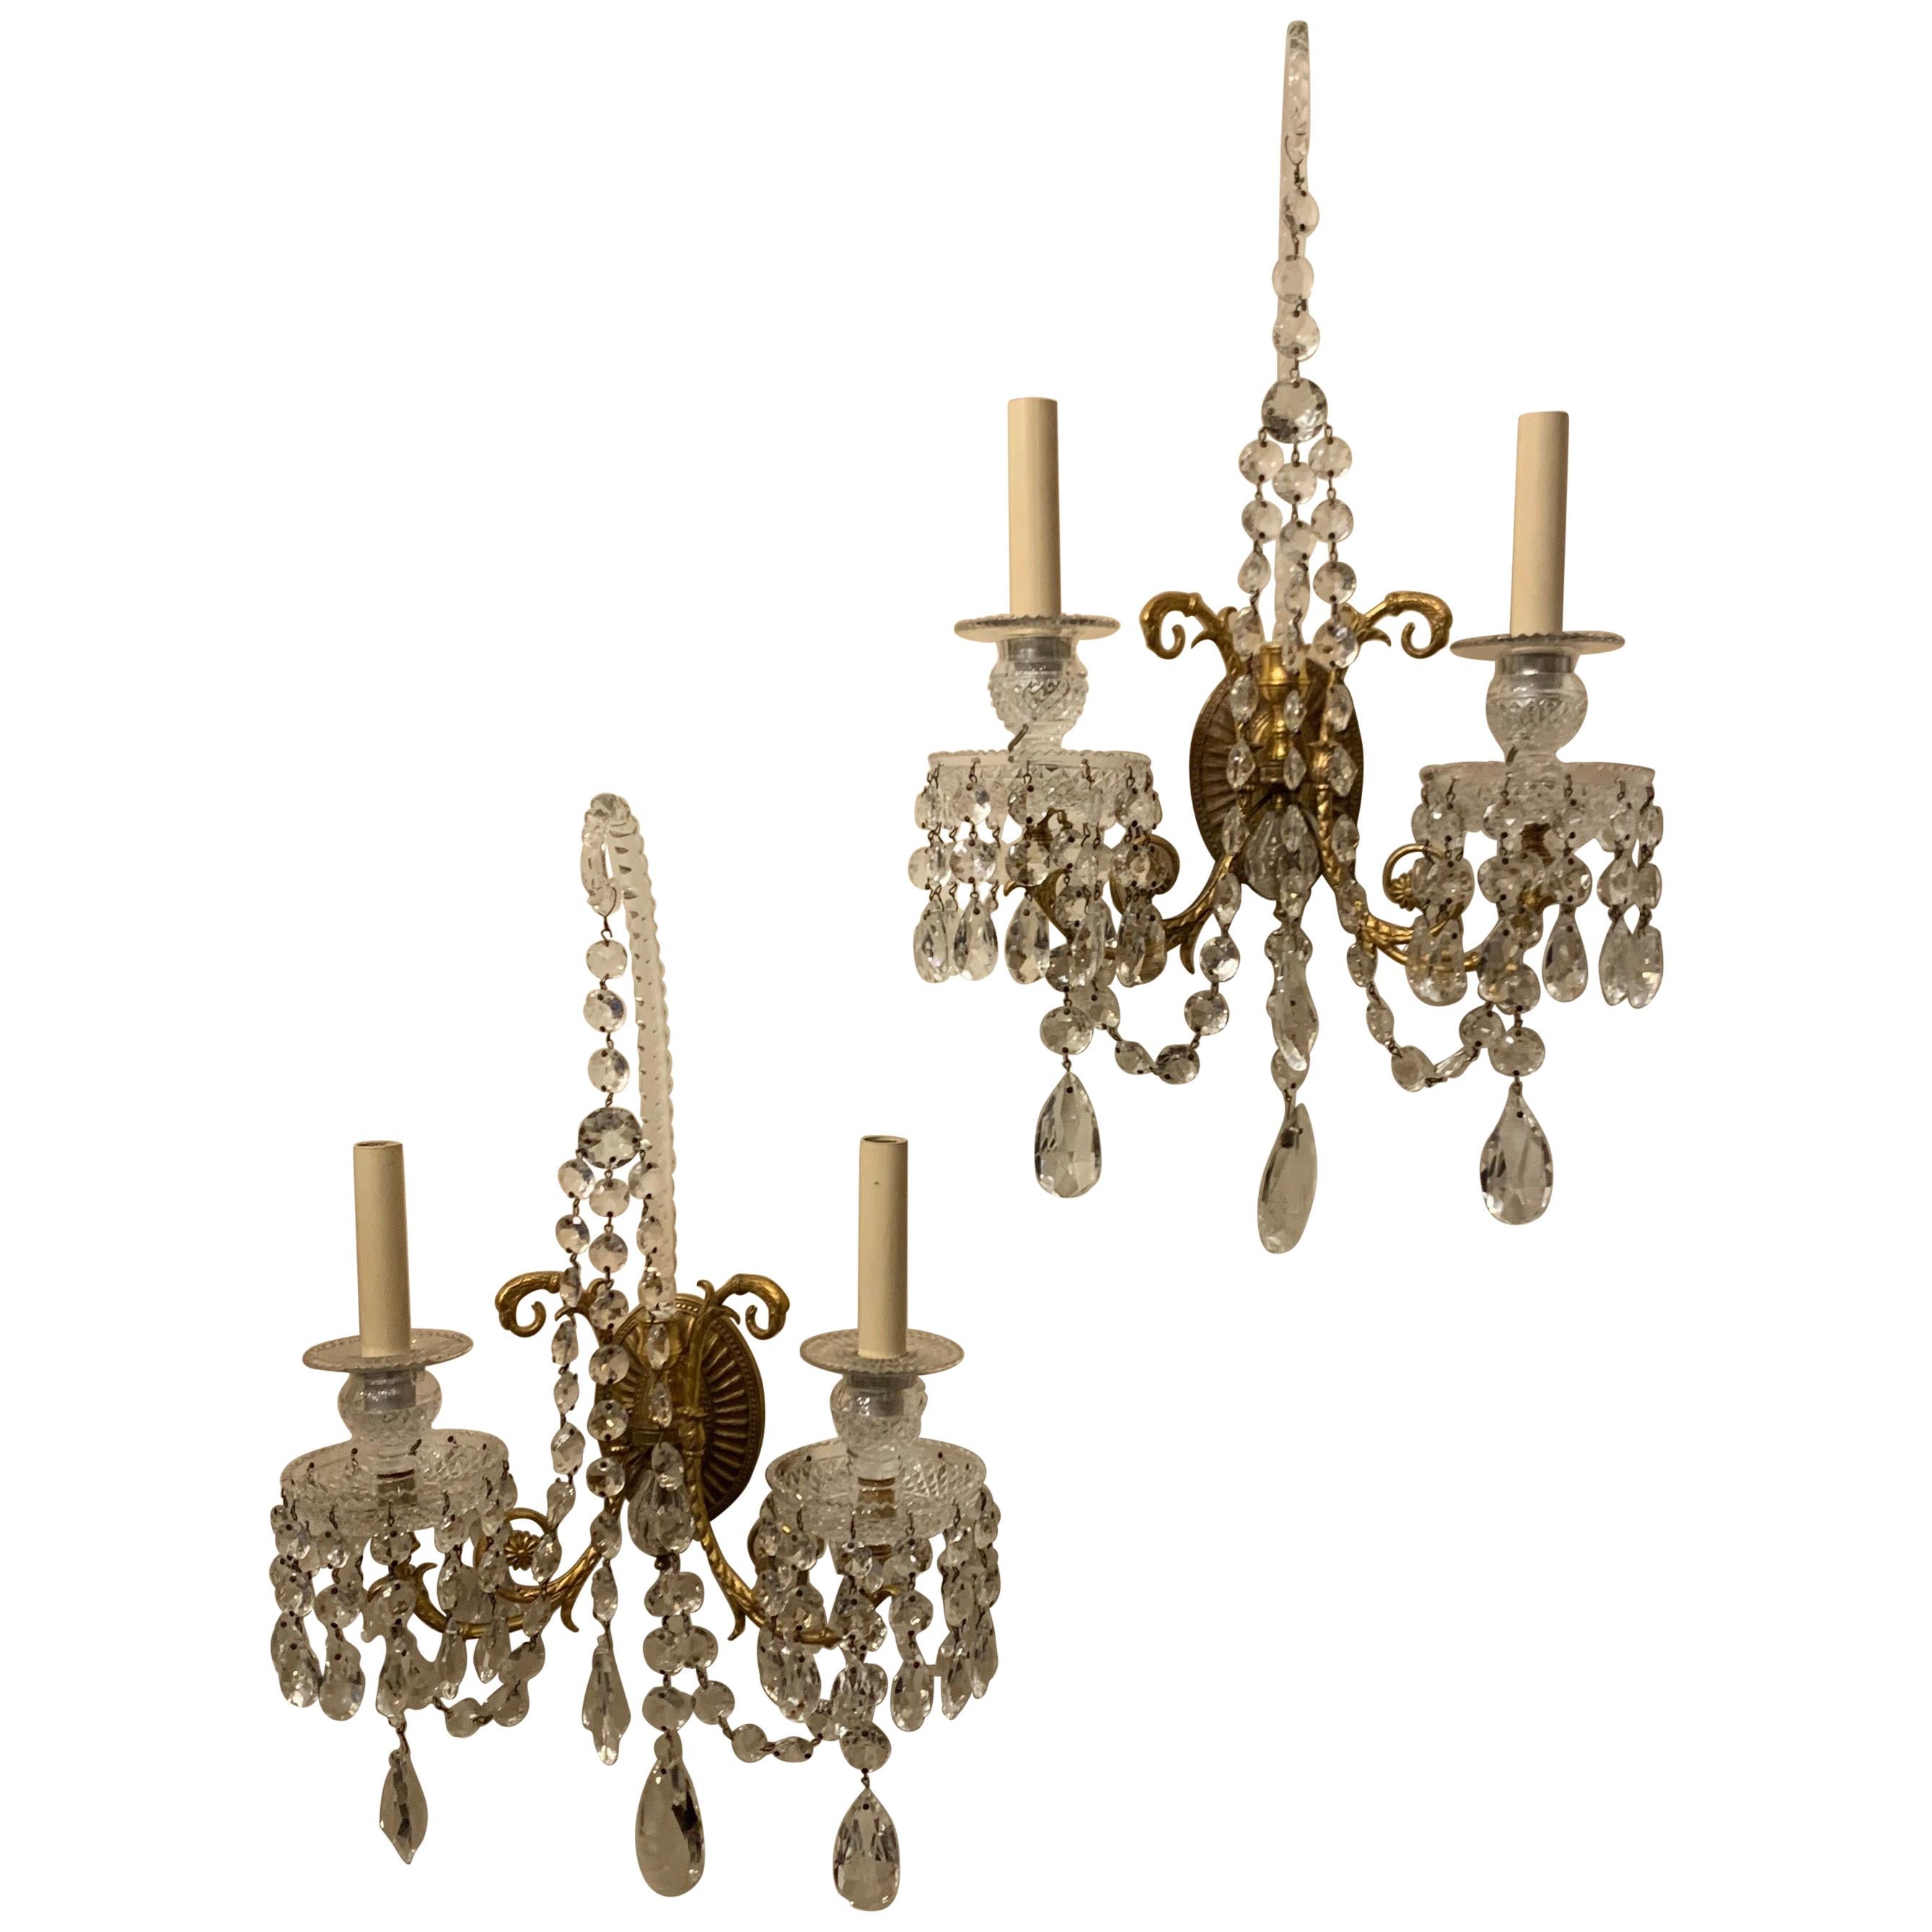 Wonderful Pair of French Doré Bronze Crystal Neoclassical Regency Empire Sconces